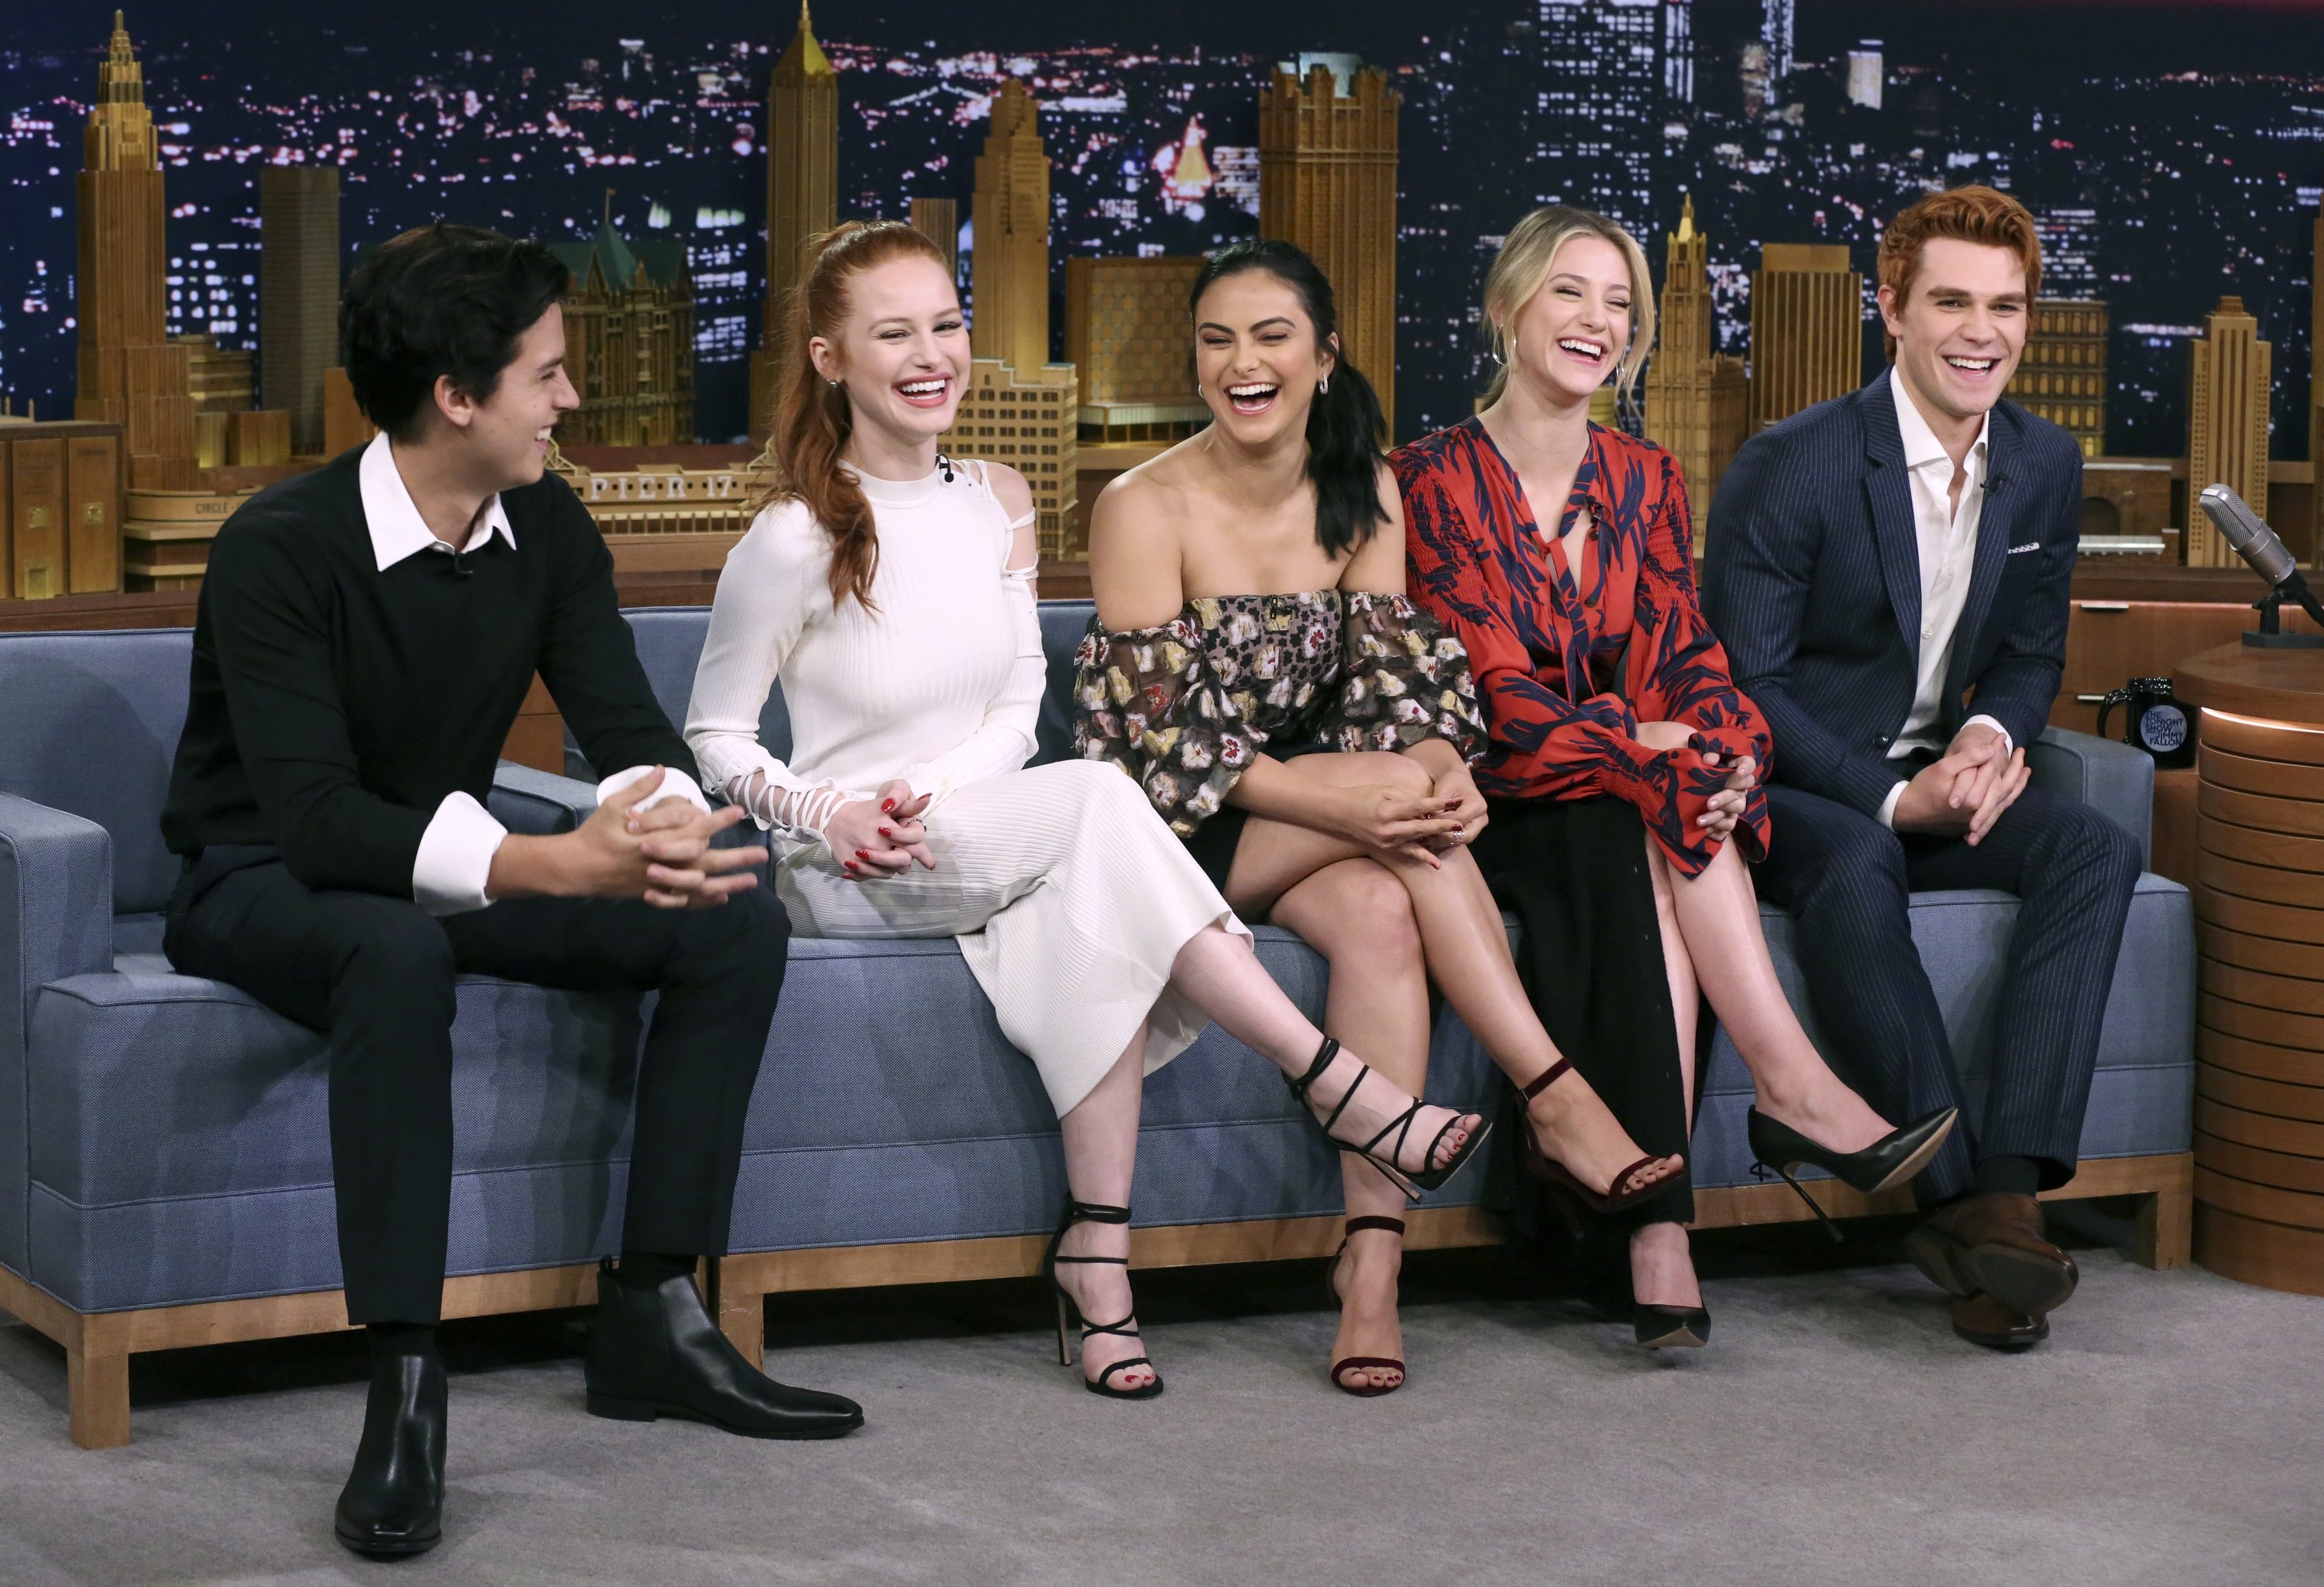 The Cast of "Riverdale" Cole Sprouse, Madelaine Petsch, Camila Mendes, Lili Reinhart, KJ Apa on October 3, 2017 | Source: Getty Images